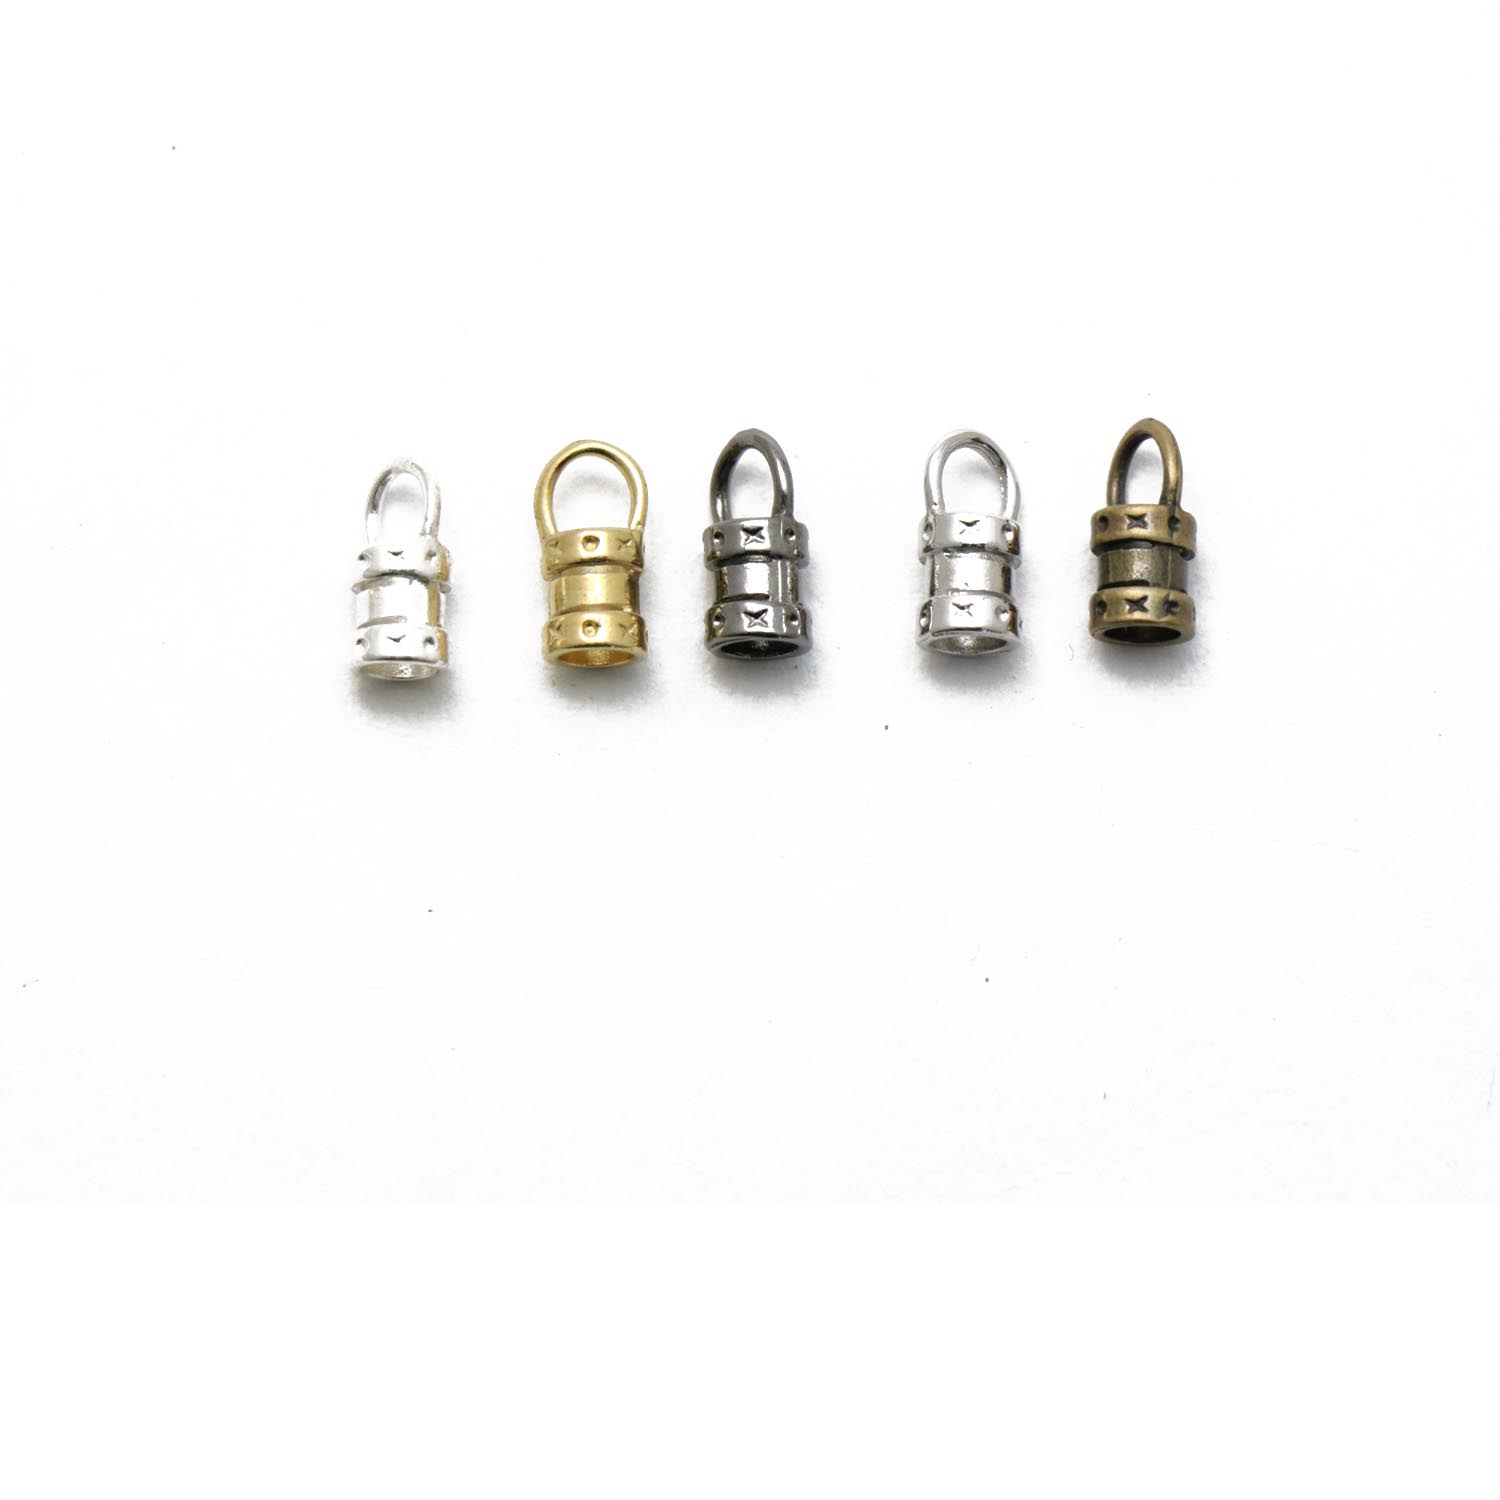 4mm Gold Cord Ends 5pk by hildie & jo